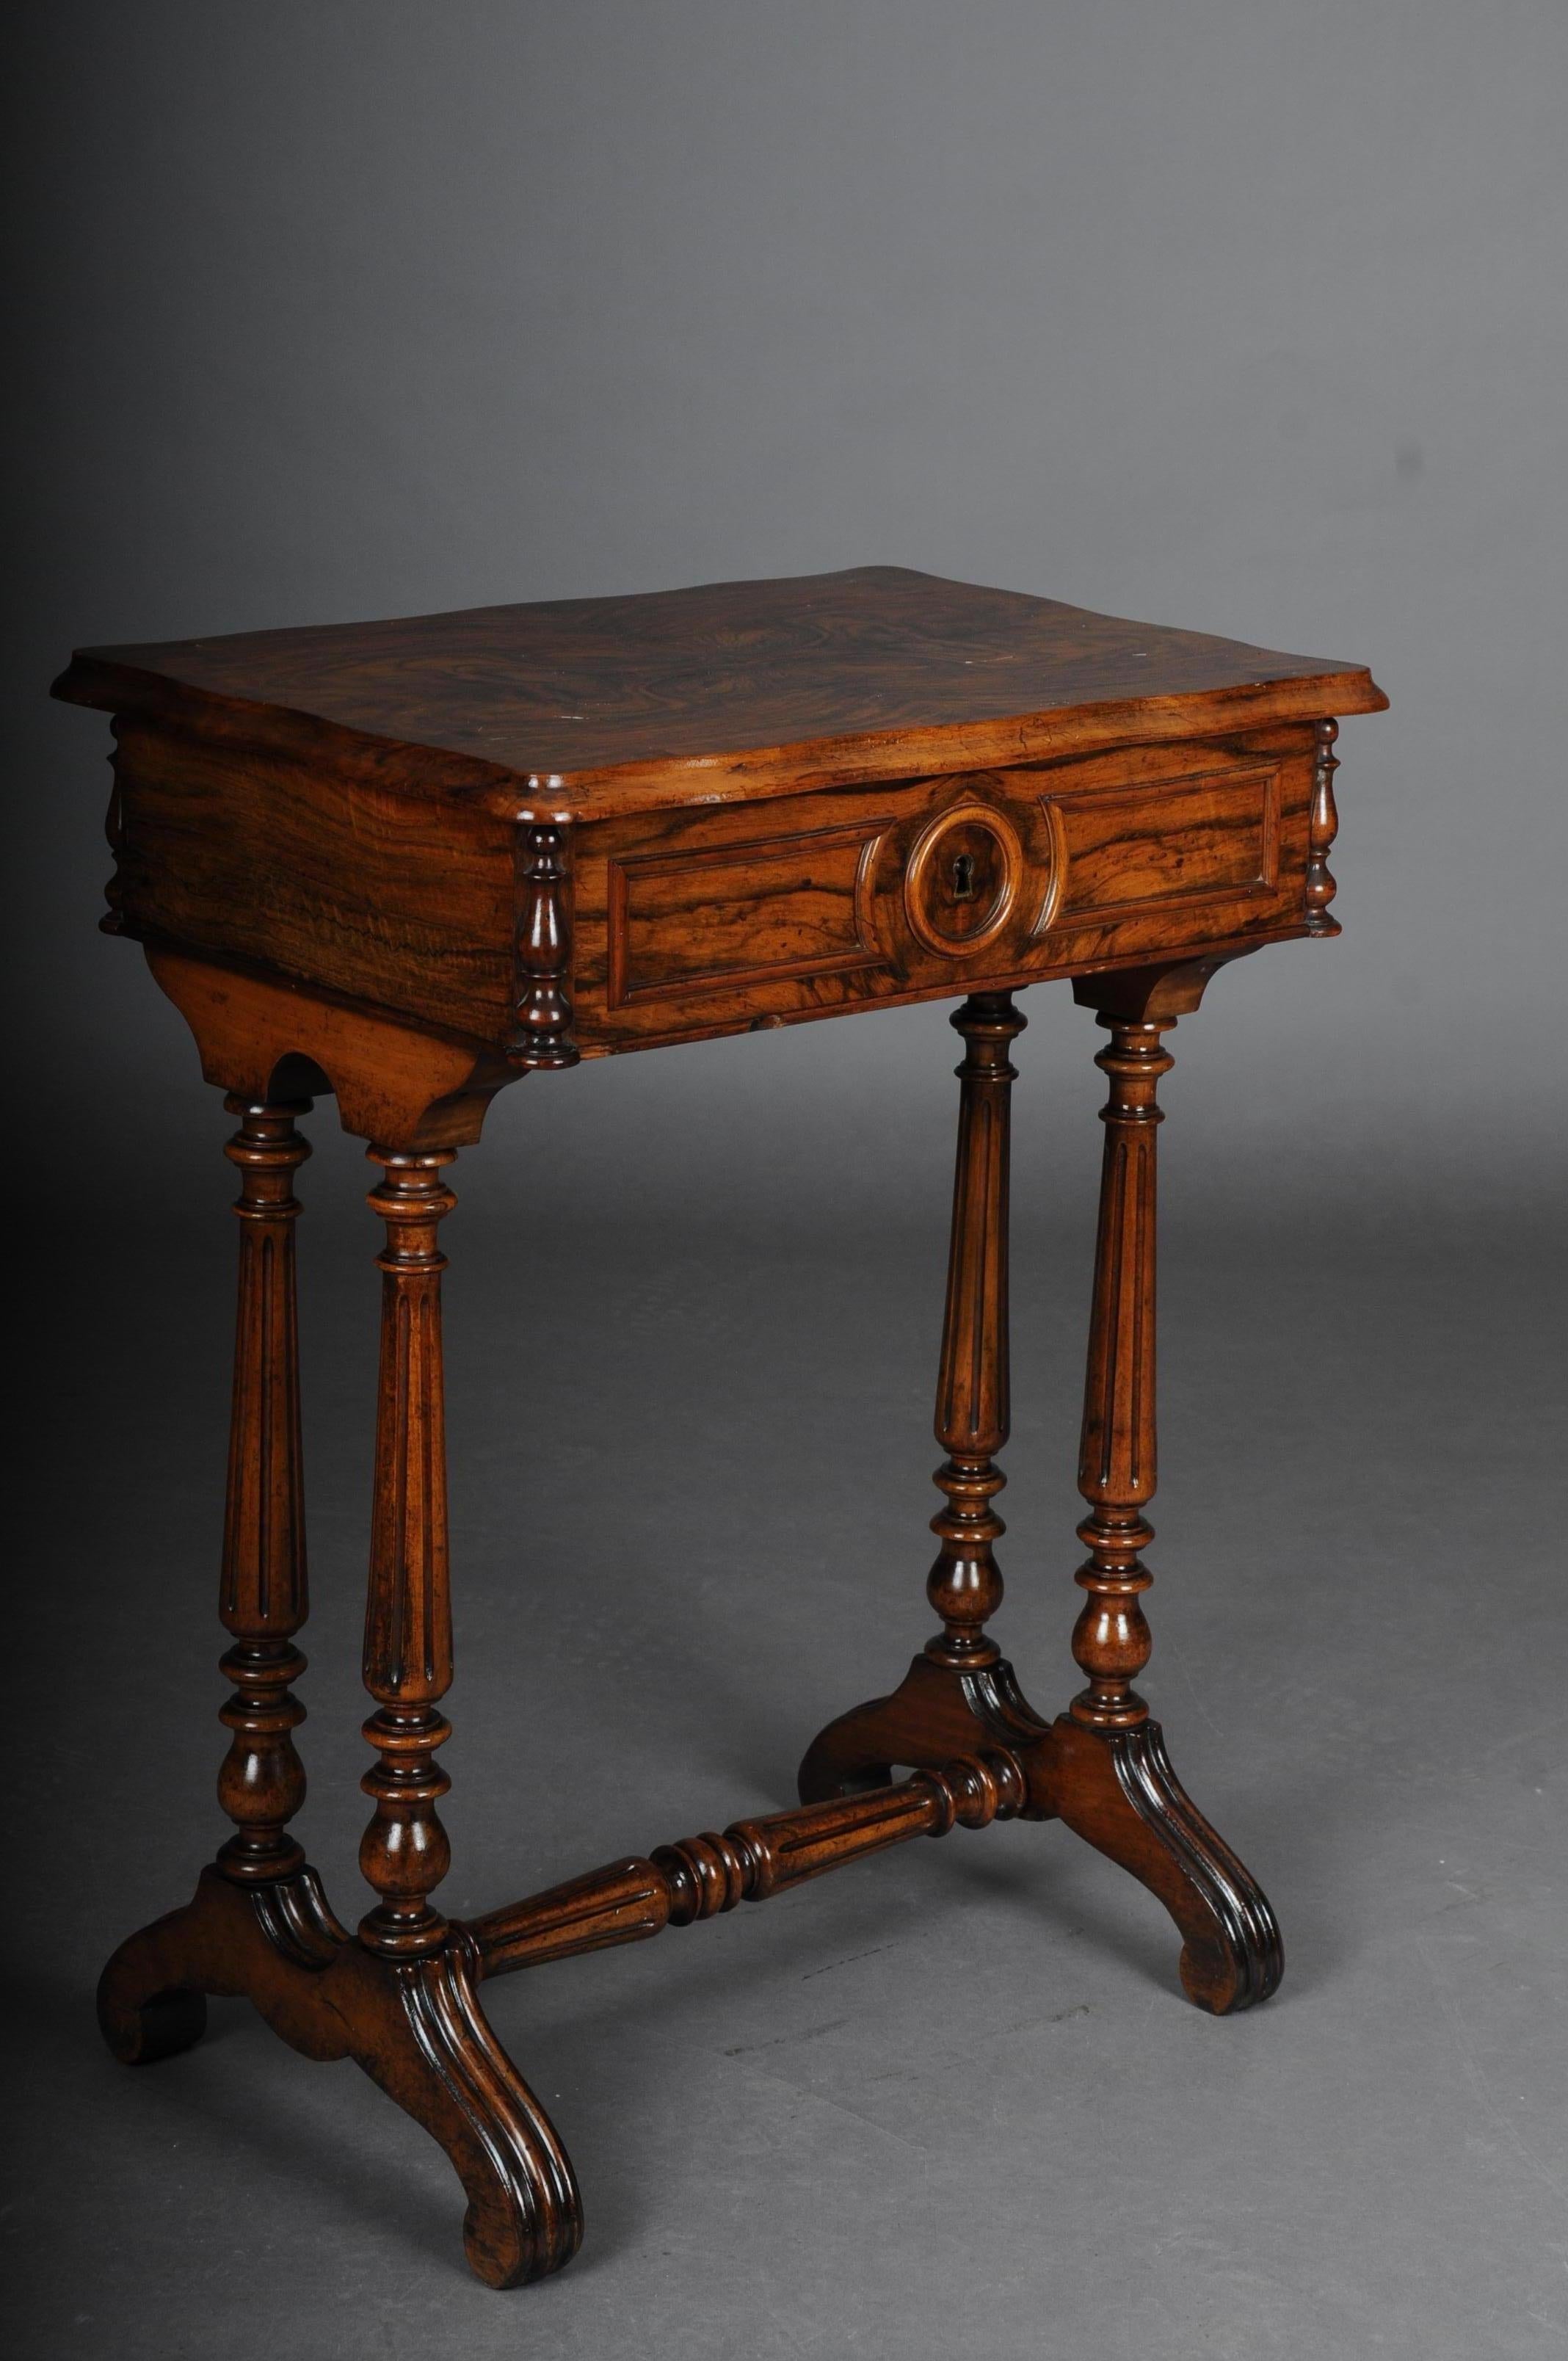 Fancy Biedermeier sewing table / side table circa 1850 walnut

Solid walnut body. Beautiful walnut mirror veneer. Frame case on four long, turned legs connected by a central bar. Hinged cover plate which is provided with a mirror (mirror has a